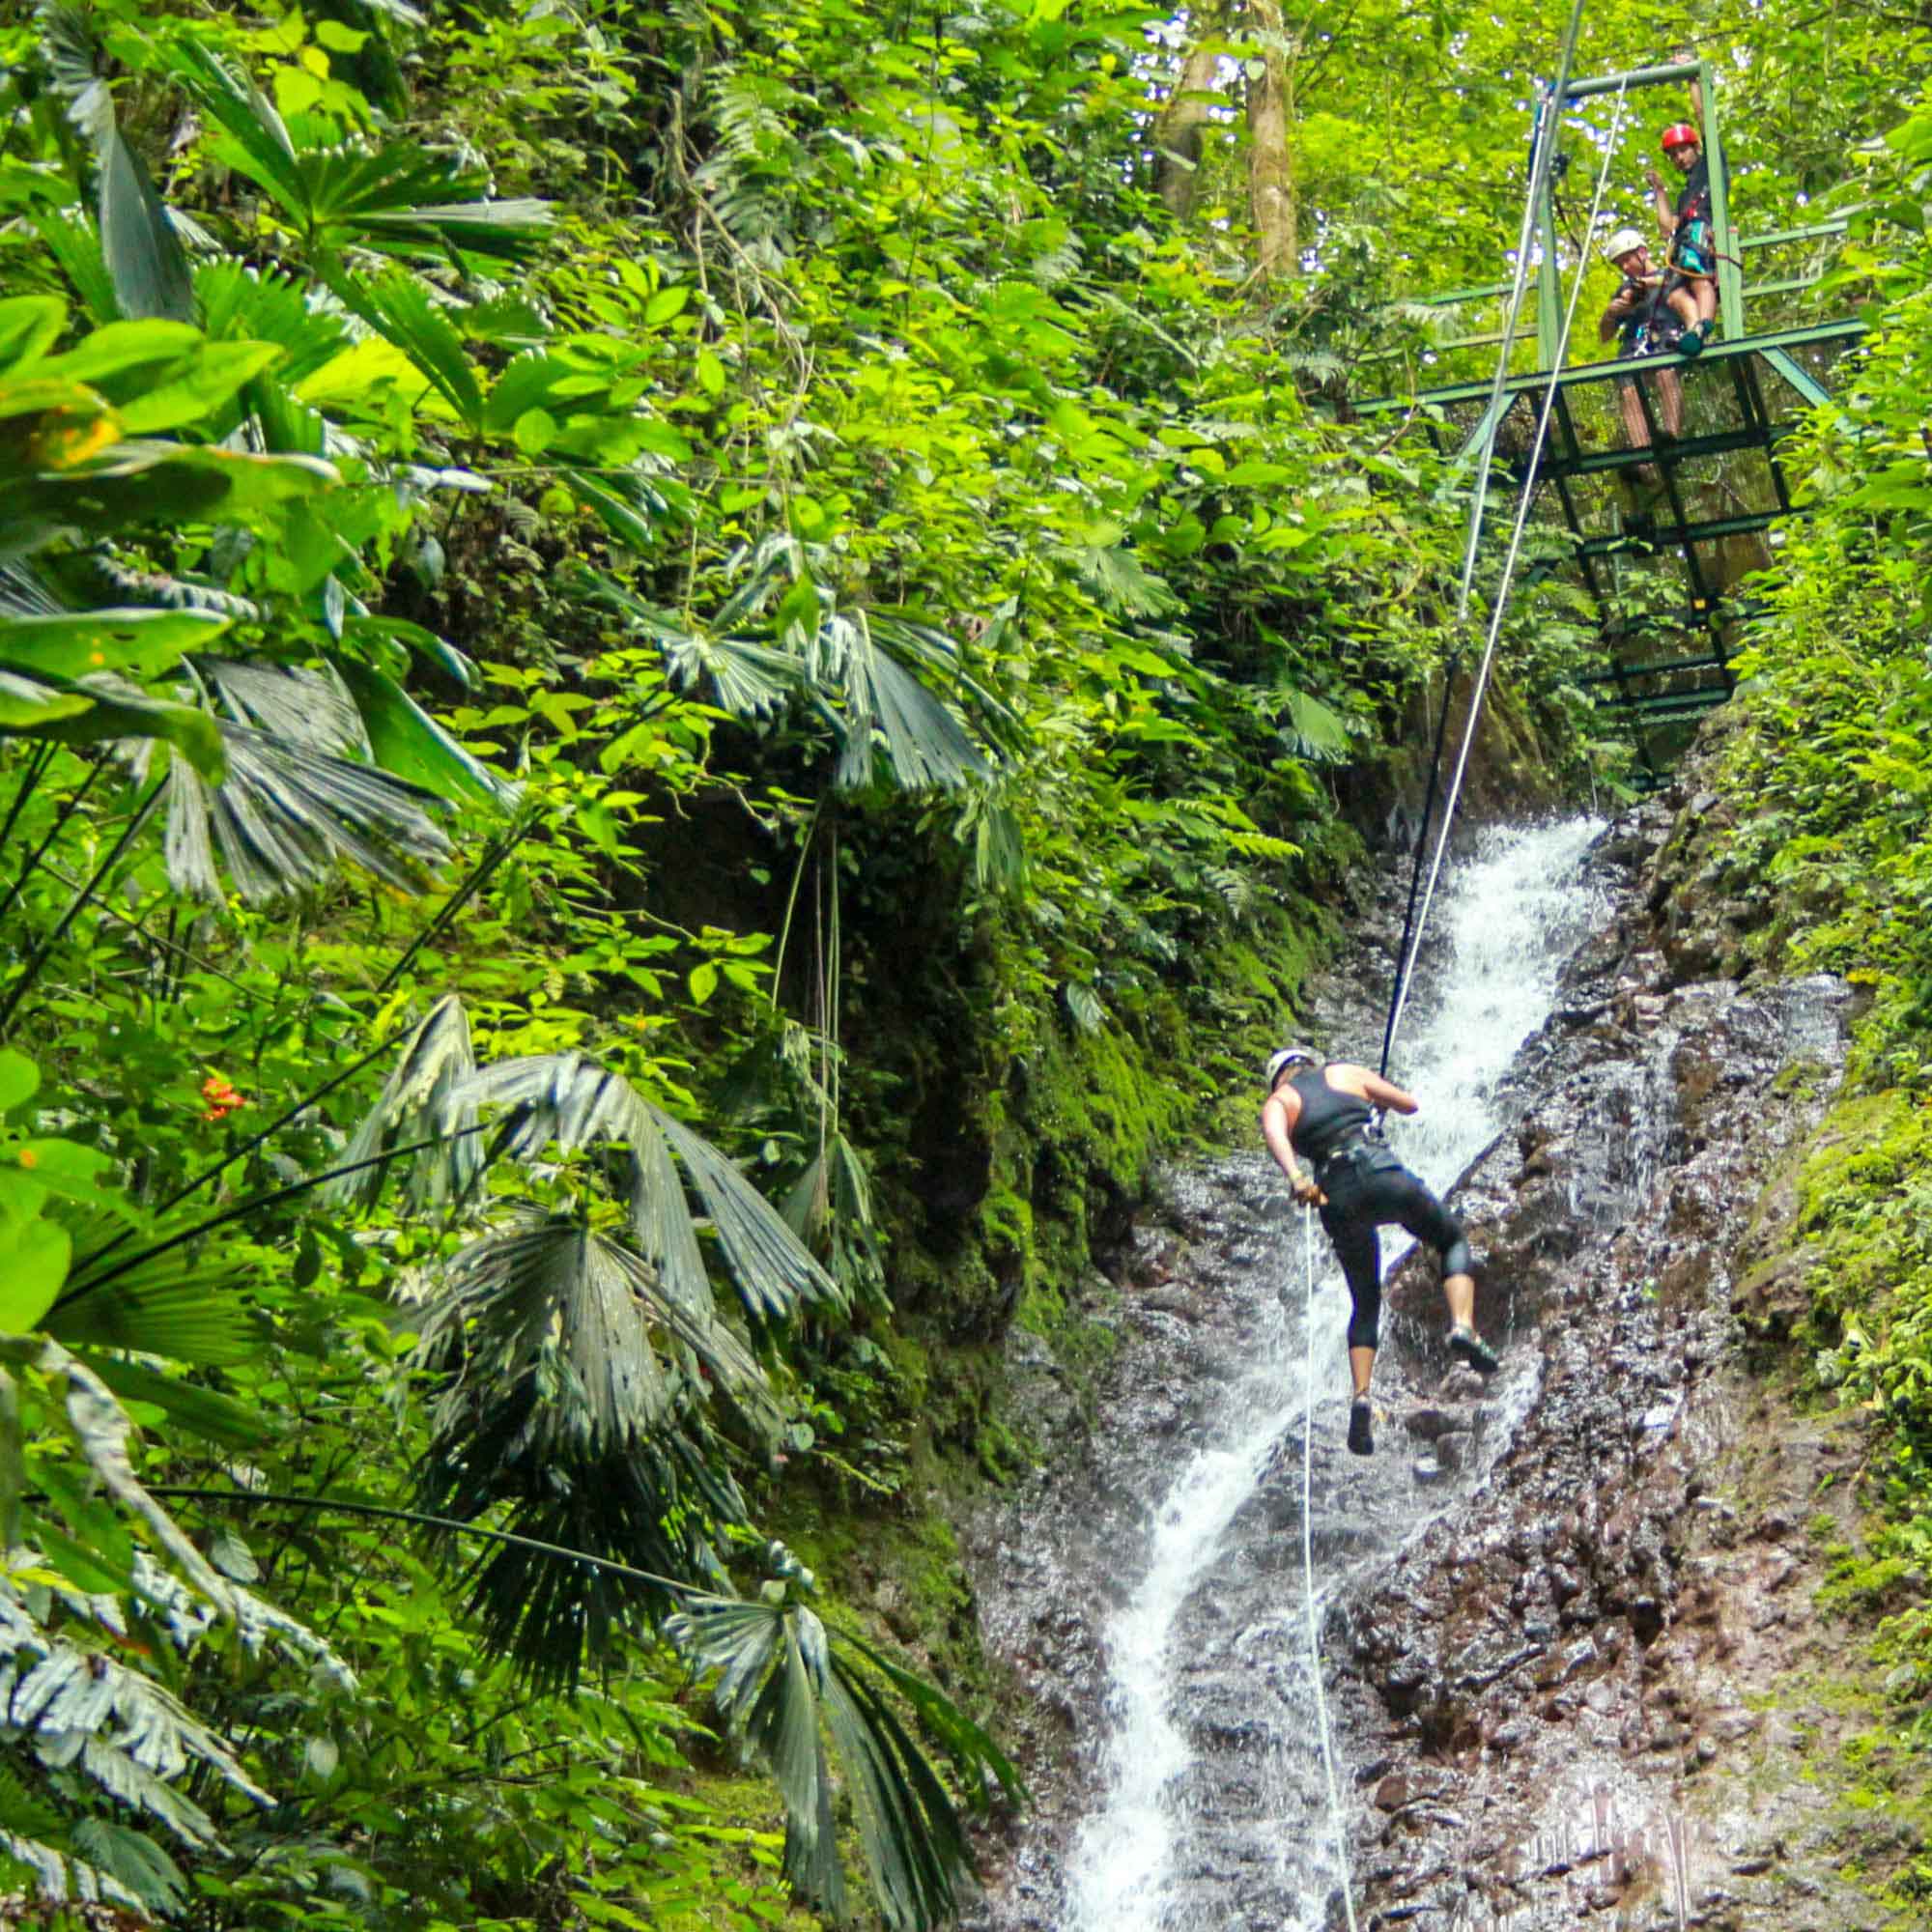 Repelling down water fall in a Costa Rican rainforest